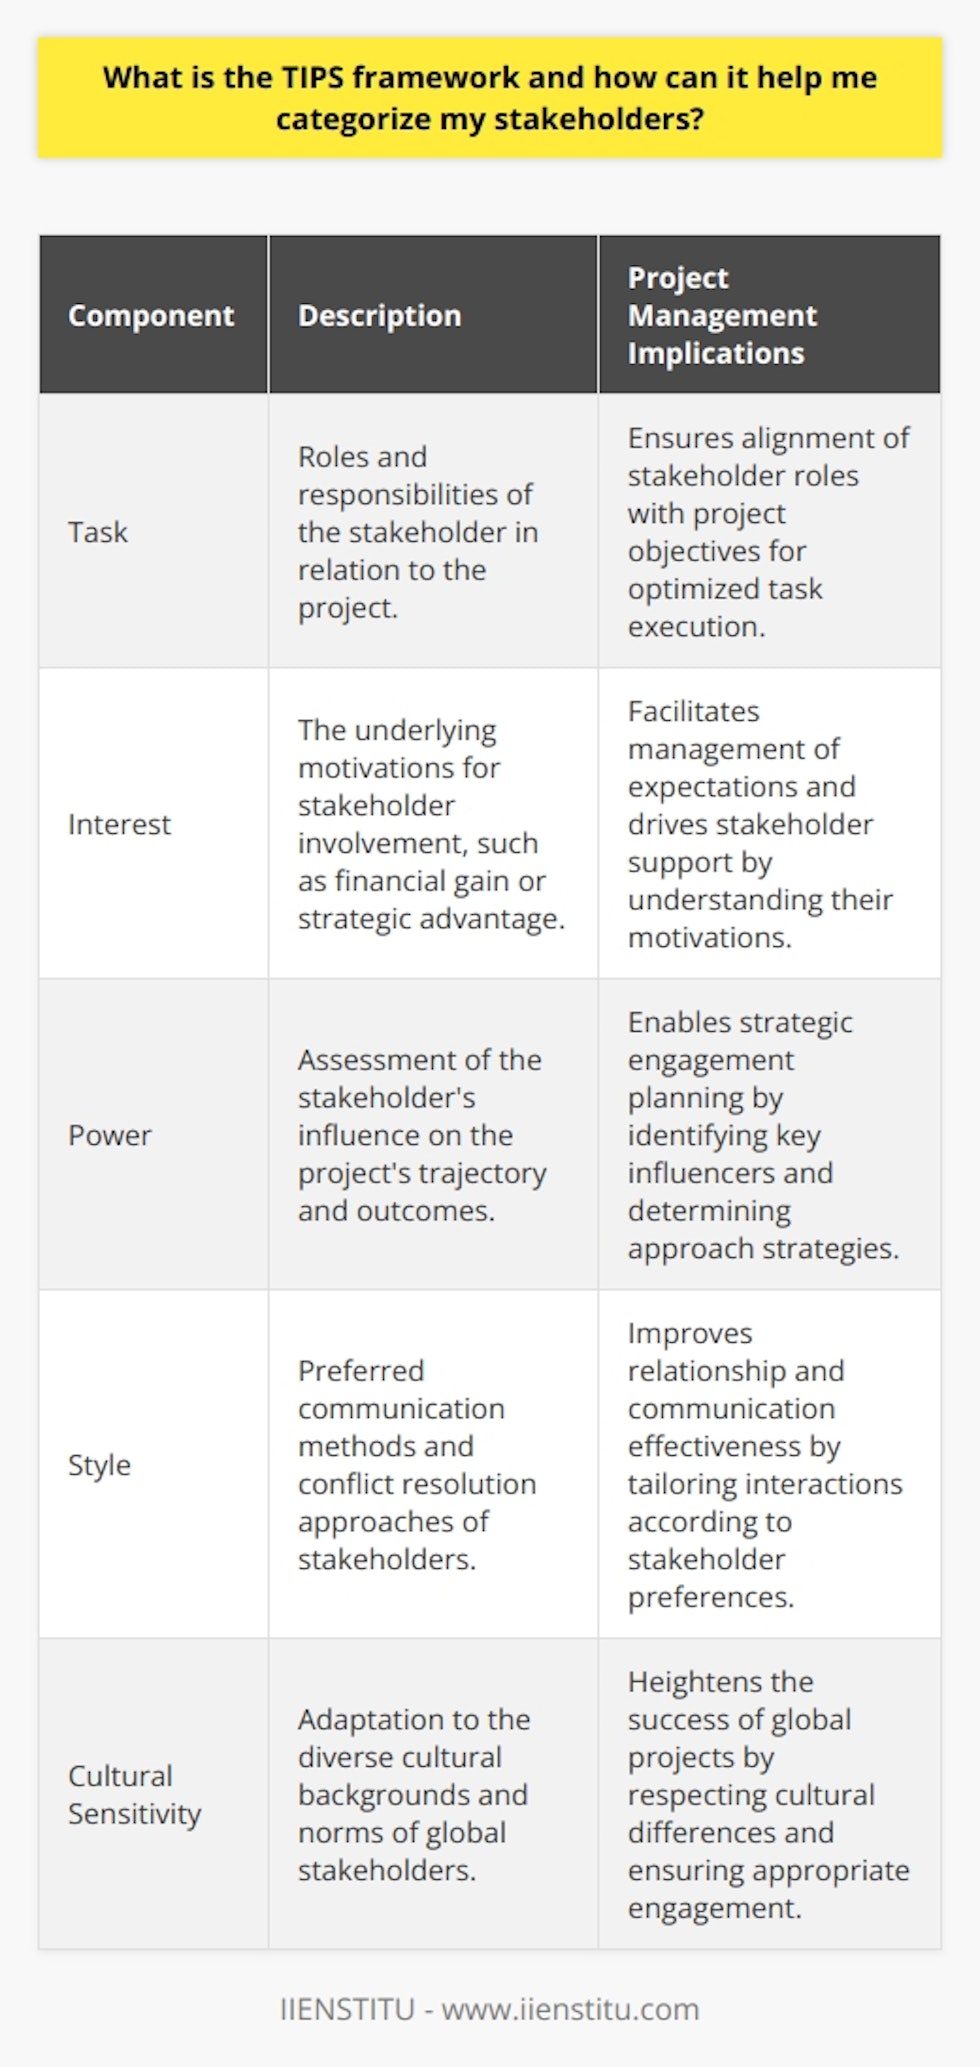 The TIPS framework is an essential tool for project managers and teams as it facilitates effective stakeholder management, which is crucial for project success. Recognizing that each stakeholder can have a differing role and impact on a project, the framework ensures that project teams can strategically engage with each category of stakeholder.Firstly, the ‘Task’ aspect involves understanding the stakeholder's responsibilities with respect to the project. Categorizing by tasks helps project managers align the stakeholder's role with the project’s objectives. For example, certain stakeholders may be responsible for decision-making, while others provide necessary information or resources.The ‘Interest’ dimension focuses on the reasons stakeholders are involved in the project. It goes beyond the surface-level engagement and delves into what drives each stakeholder. Is it financial gain, strategic positioning, or something else? Understanding these interests is key in managing expectations and galvanizing support for the project.The ‘Power’ component is about gauging the level of influence stakeholders have over the project's direction and outcome. This might mean identifying those who can enact changes, halt progress, or must be carefully managed due to their ability to significantly impact the project. Knowing who has the power helps in planning how to approach and engage with these stakeholders.Finally, the ‘Style’ of stakeholders is about their preferred way of communication and interaction. It is whether they prefer formal reports, informal chats, or collaborative workshops. It is about understanding their approach to conflict and decision-making. Appreciating and adapting to these styles can greatly enhance the effectiveness of communication and the overall relationship with the stakeholder.While the TIPS framework is not widely discussed online like other project management tools, it aligns closely with methodologies that emphasize stakeholder analysis, such as the Power/Interest grid or Salience model. It stands out by bringing in the less frequently discussed element of communication style and interpersonal dynamics (Style), which can be particularly important in complex or sensitive projects.An additional aspect to consider when using the TIPS framework is cultural sensitivity, especially in global projects where stakeholders may come from diverse backgrounds. This requires a nuanced approach to ‘Style’ and communication that respects different cultural norms and expectations.In practice, the TIPS framework can be visualized through a matrix or chart, which then aids in developing strategies for each stakeholder group. What's noteworthy is that an individual stakeholder may have high 'Interest' but low 'Power', necessitating a different approach than one with high 'Power' but different 'Interests'.IIENSTITU, as a provider of educational resources and courses, may incorporate the TIPS framework into its project management curriculum, offering a unique perspective on stakeholder engagement often missed in conventional teachings. Using such a framework in education can cultivate a nuanced understanding of stakeholder dynamics among learners who may then apply this knowledge in varied professional contexts.Through the TIPS framework, projects can be managed more strategically and effectively, carefully balancing stakeholder contributions, interests, and dynamics for the betterment of project outcomes and stakeholder satisfaction.